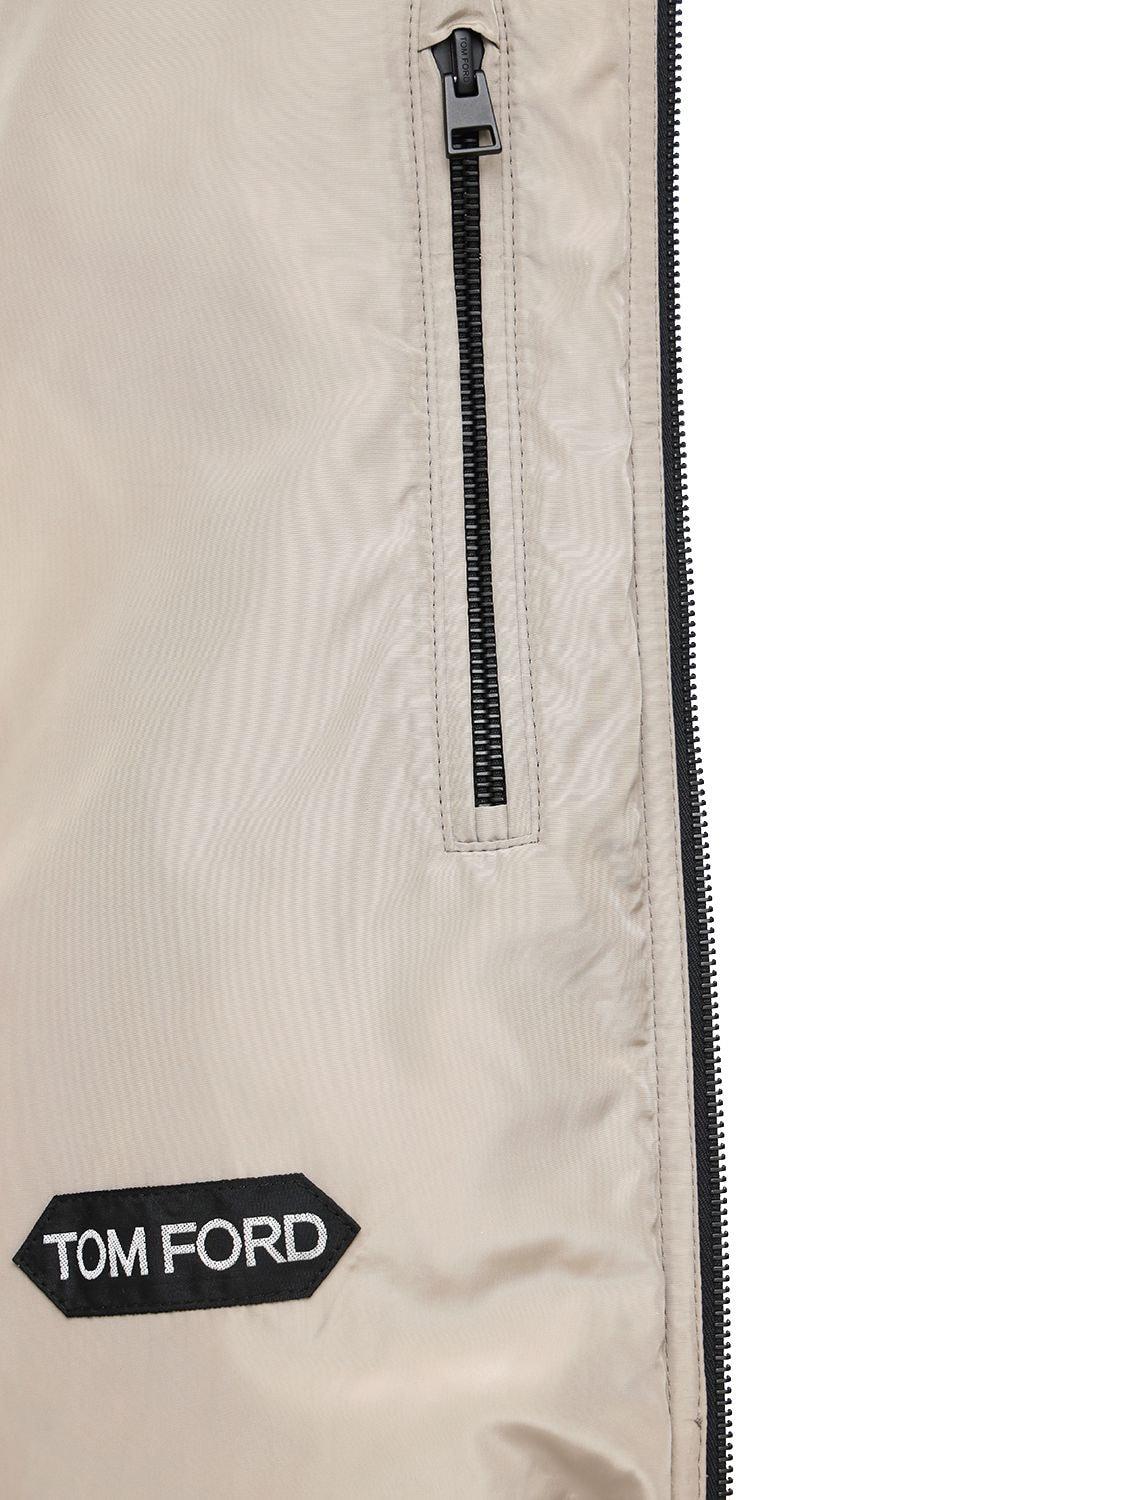 Tom Ford Synthetic Hooded Nylon & Wool Knit Jacket in Beige 